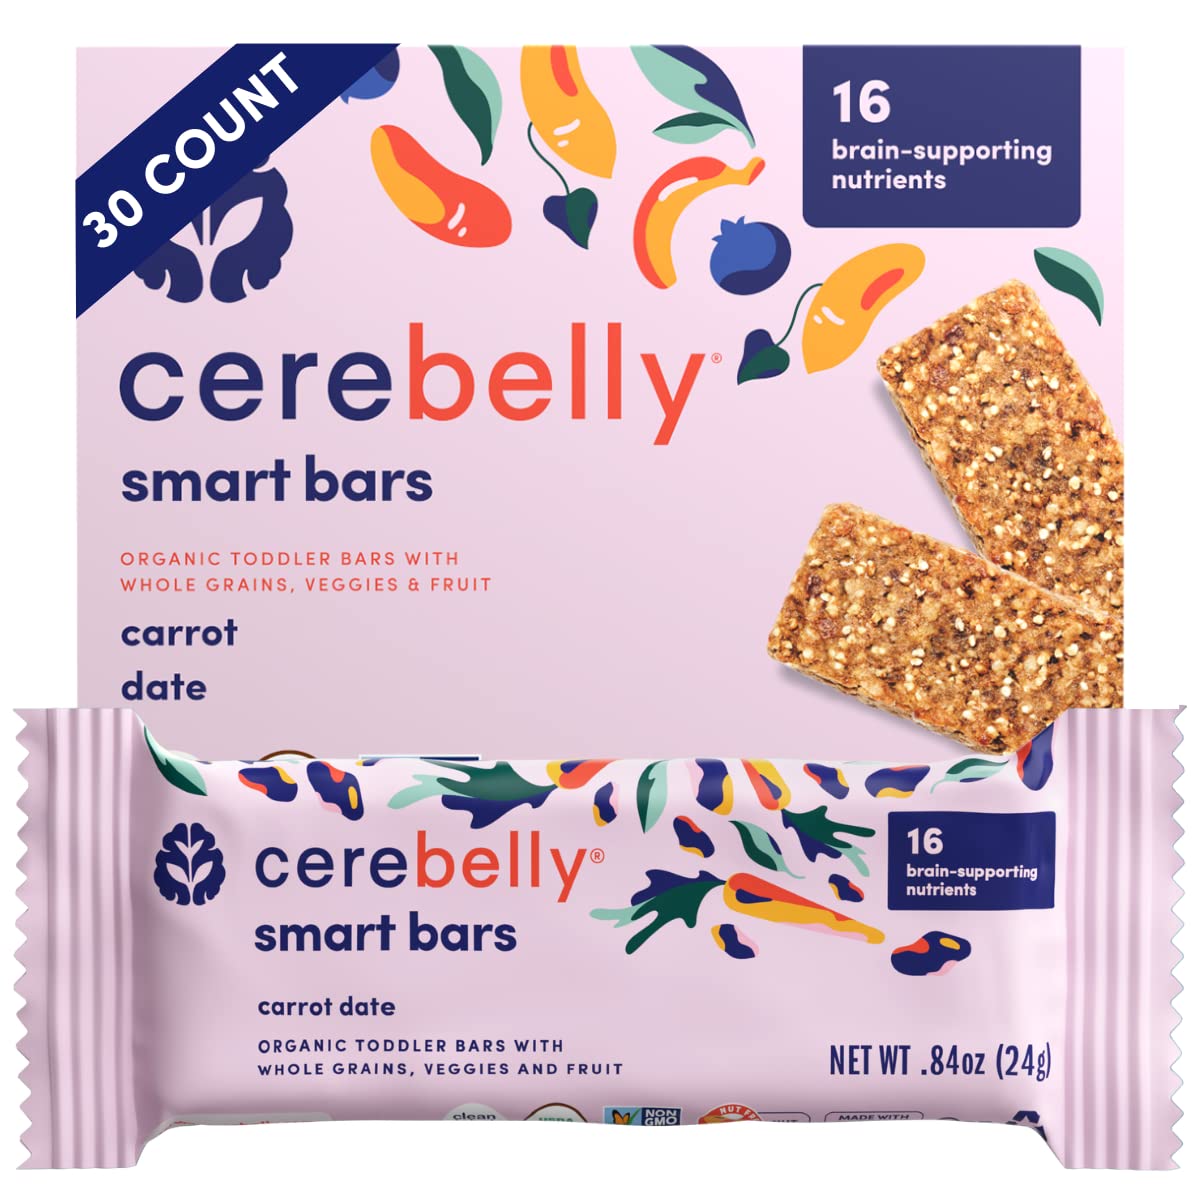 Cerebelly Toddler Snack Bars – Organic Carrot Date Smart Bars (Pack of 30), Healthy Snack Bars for Kids - 16 Brain-supporting Nutrients, Made with Gluten Free Ingredients, Nut Free, No Added Sugar